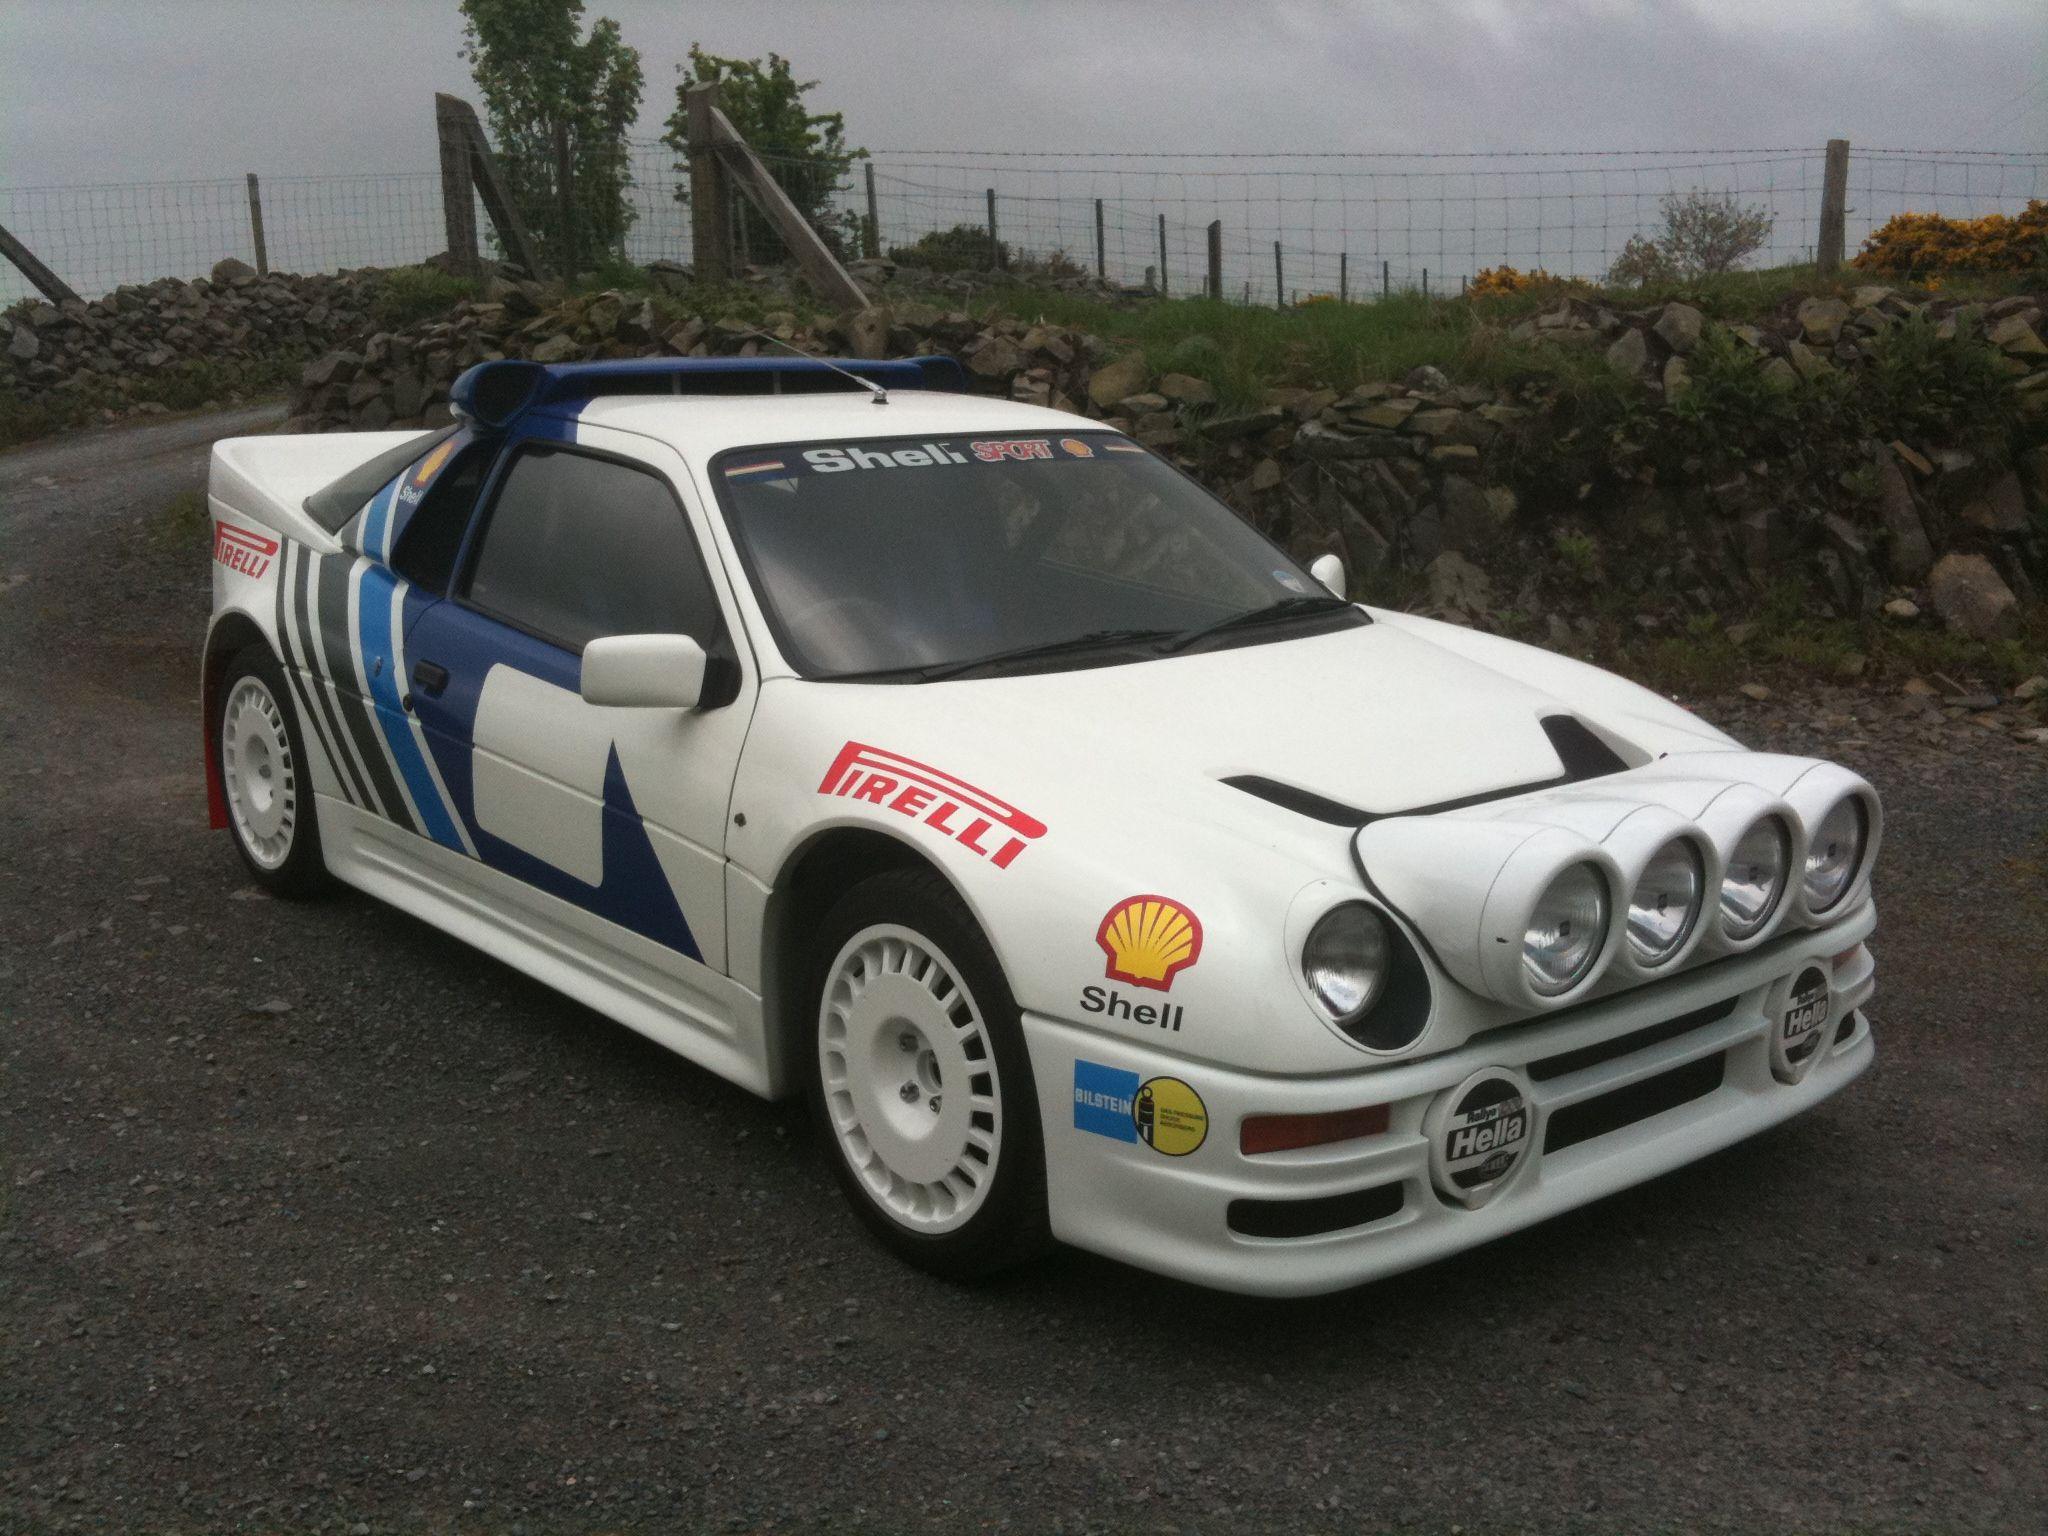 My Ford RS replica , with rally livery